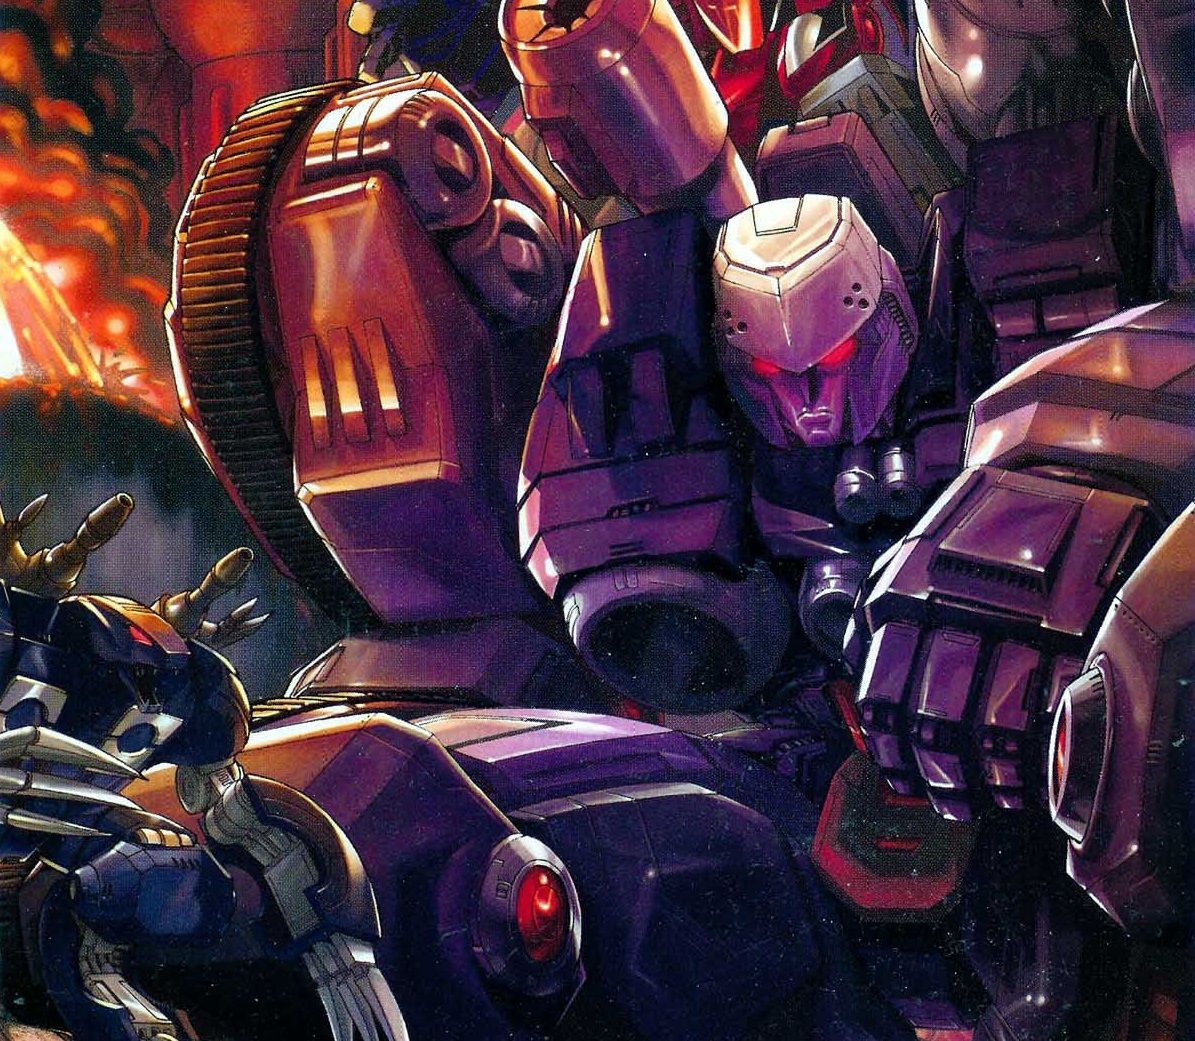 Megatron on the cover of Dreamwave's Transformers: War Wtihin. 